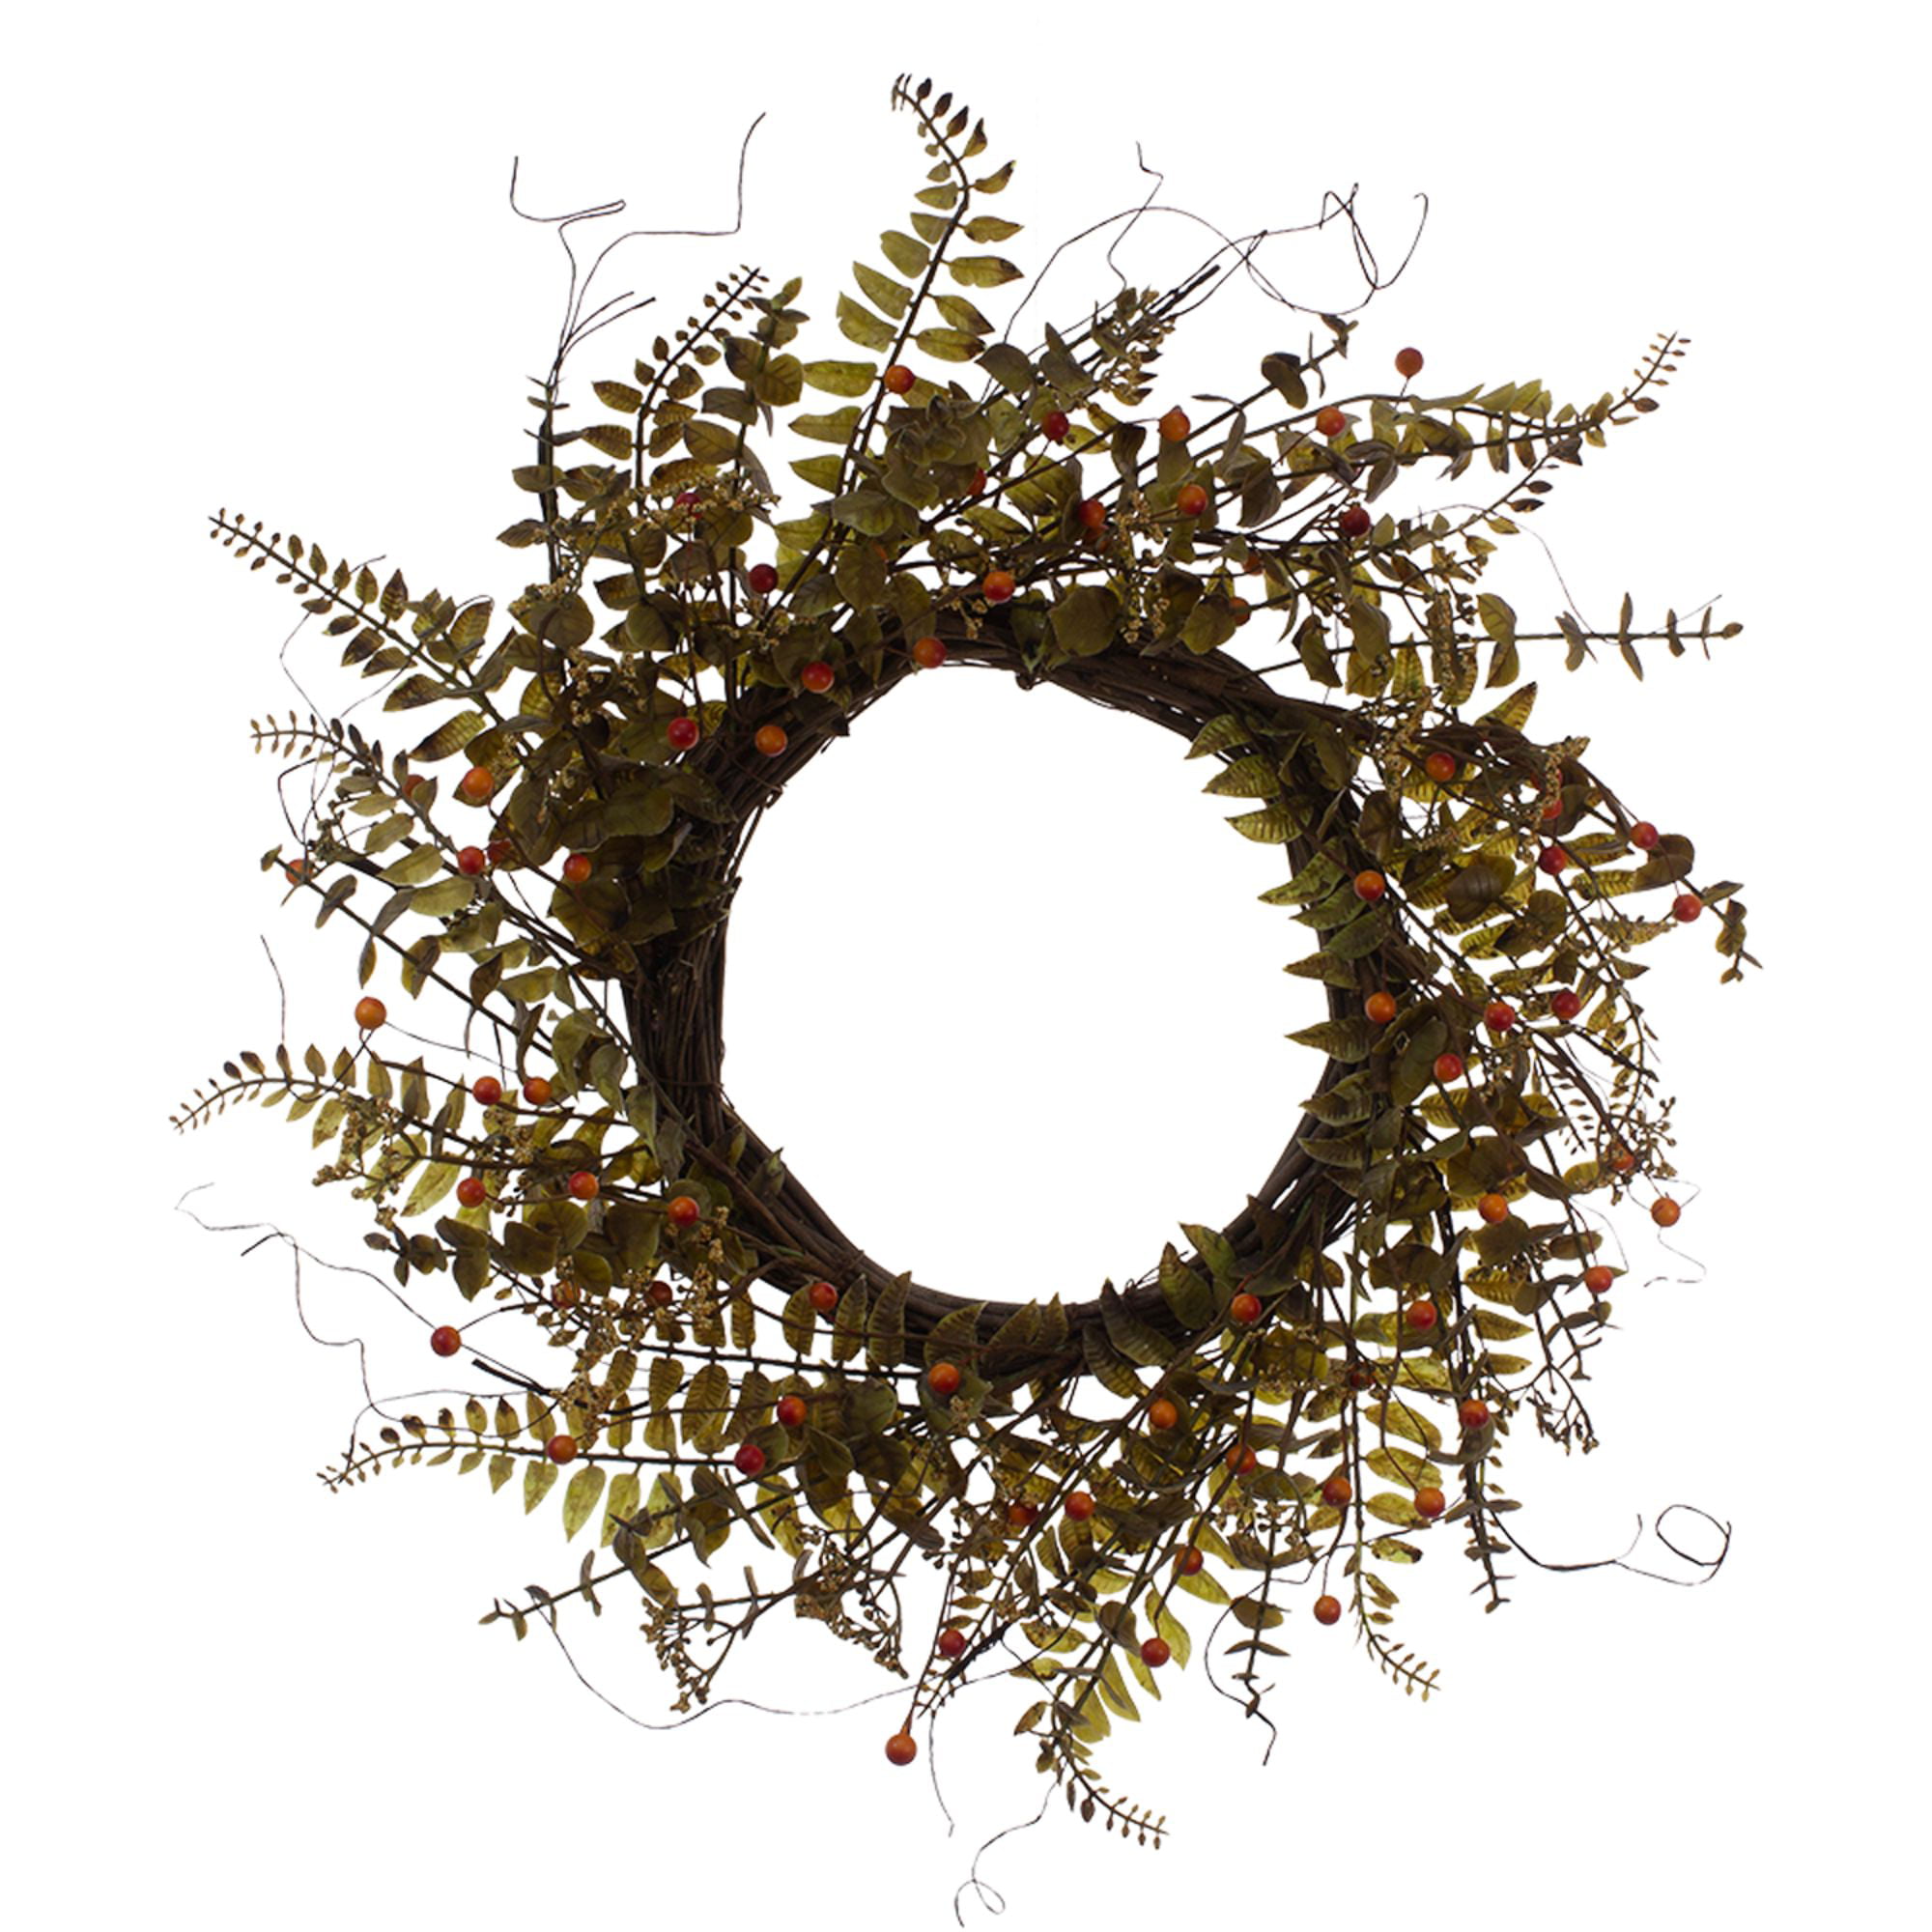 Mix of 30 Bark Shapes,10 Hearts,10 Maple Leaves,10 Stars.Crafts Wedding Wreaths. 